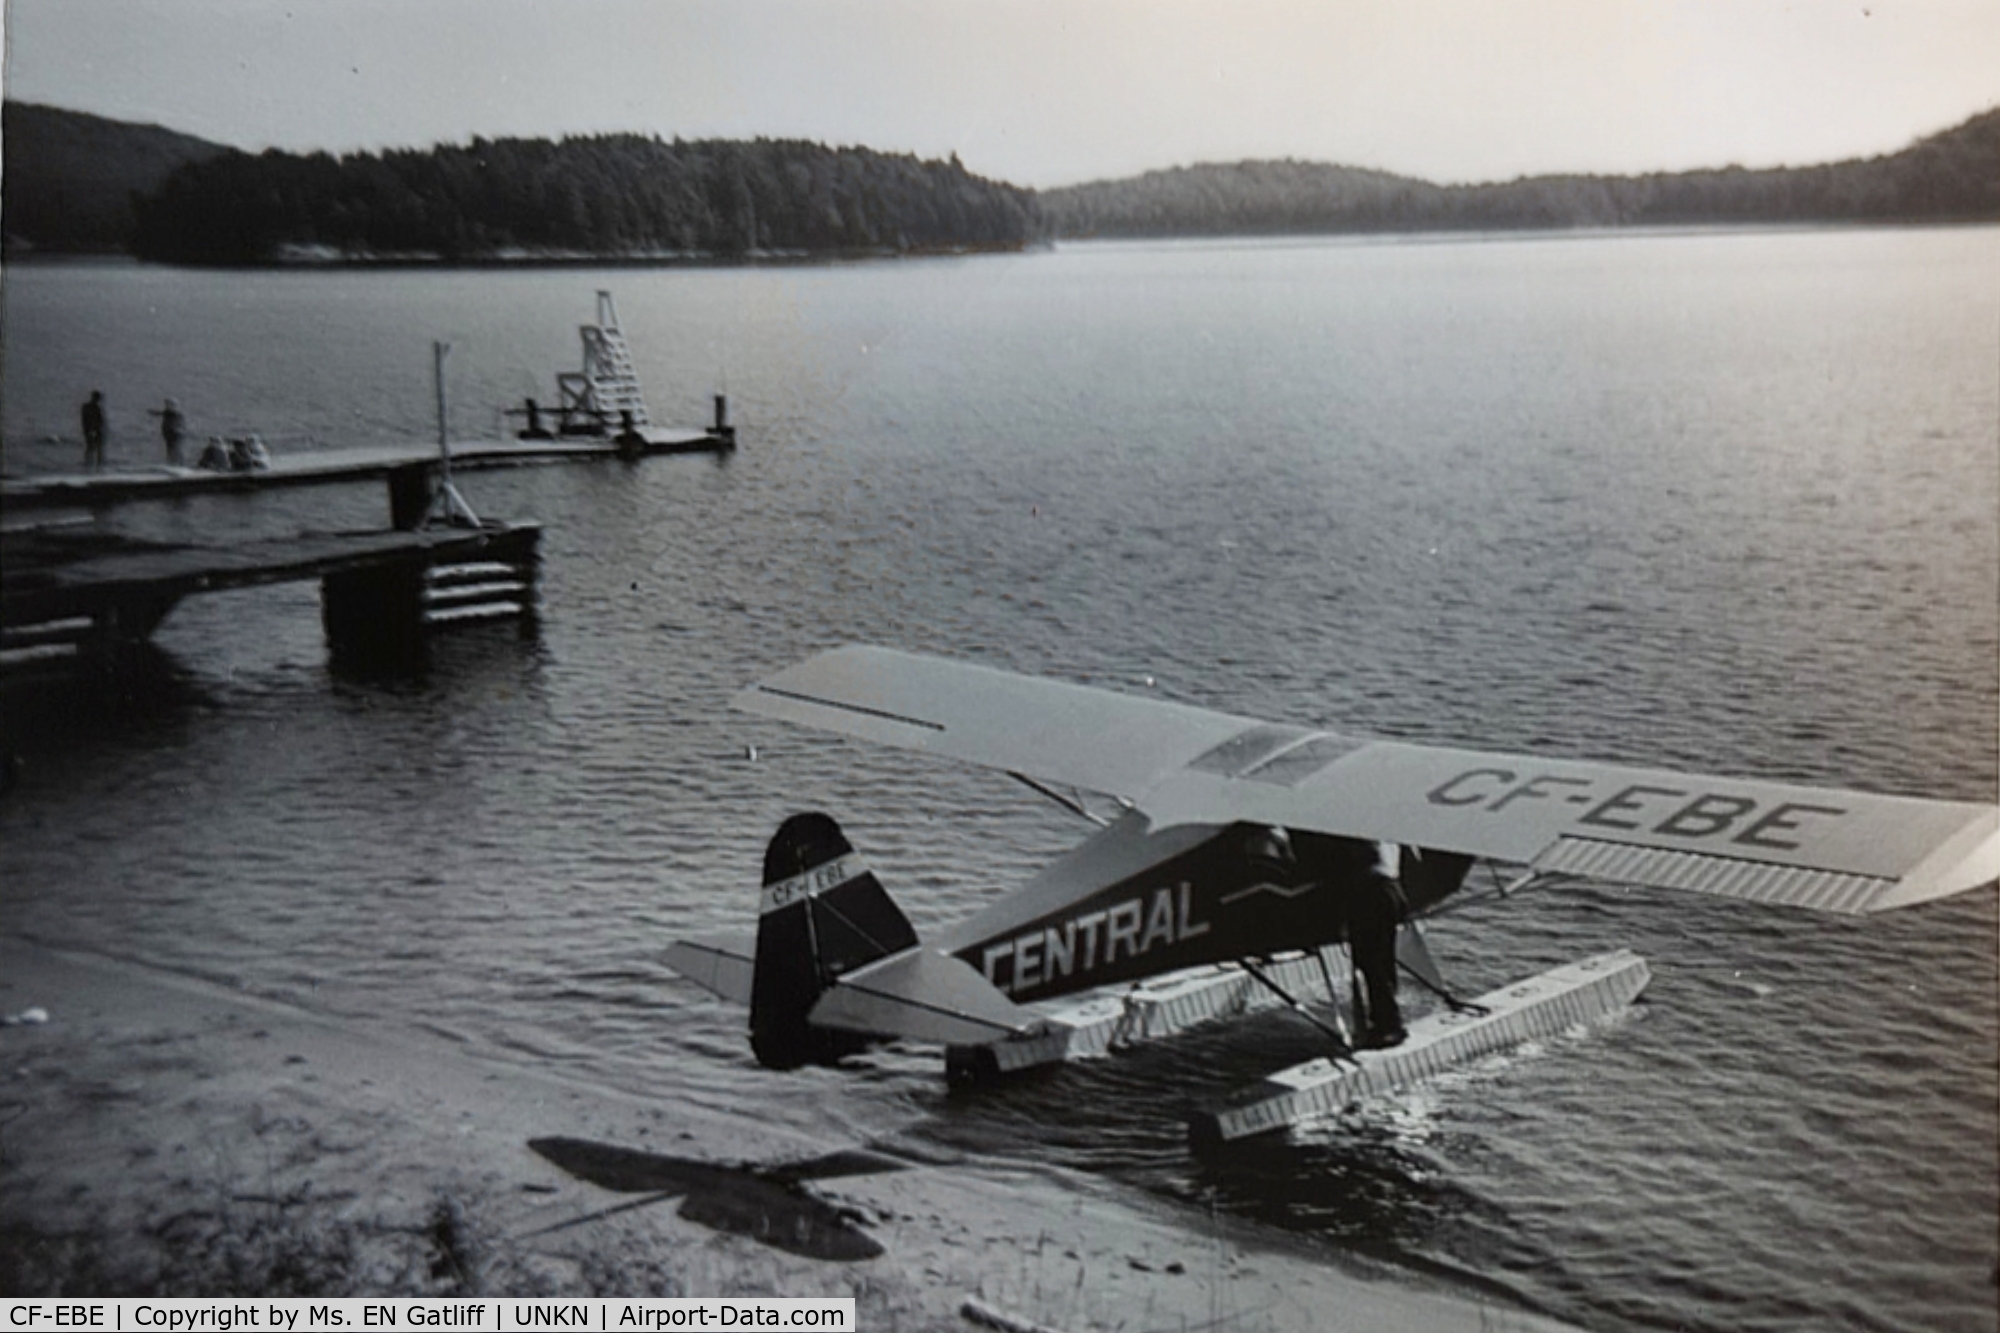 CF-EBE, 1947 Fleet 80 Canuck C/N 149, CF-EBE Floating on lake by a small beach about 15 metres from landing stage. I have just found this in my late aunt's photographs. I am amazed the plane is still around.